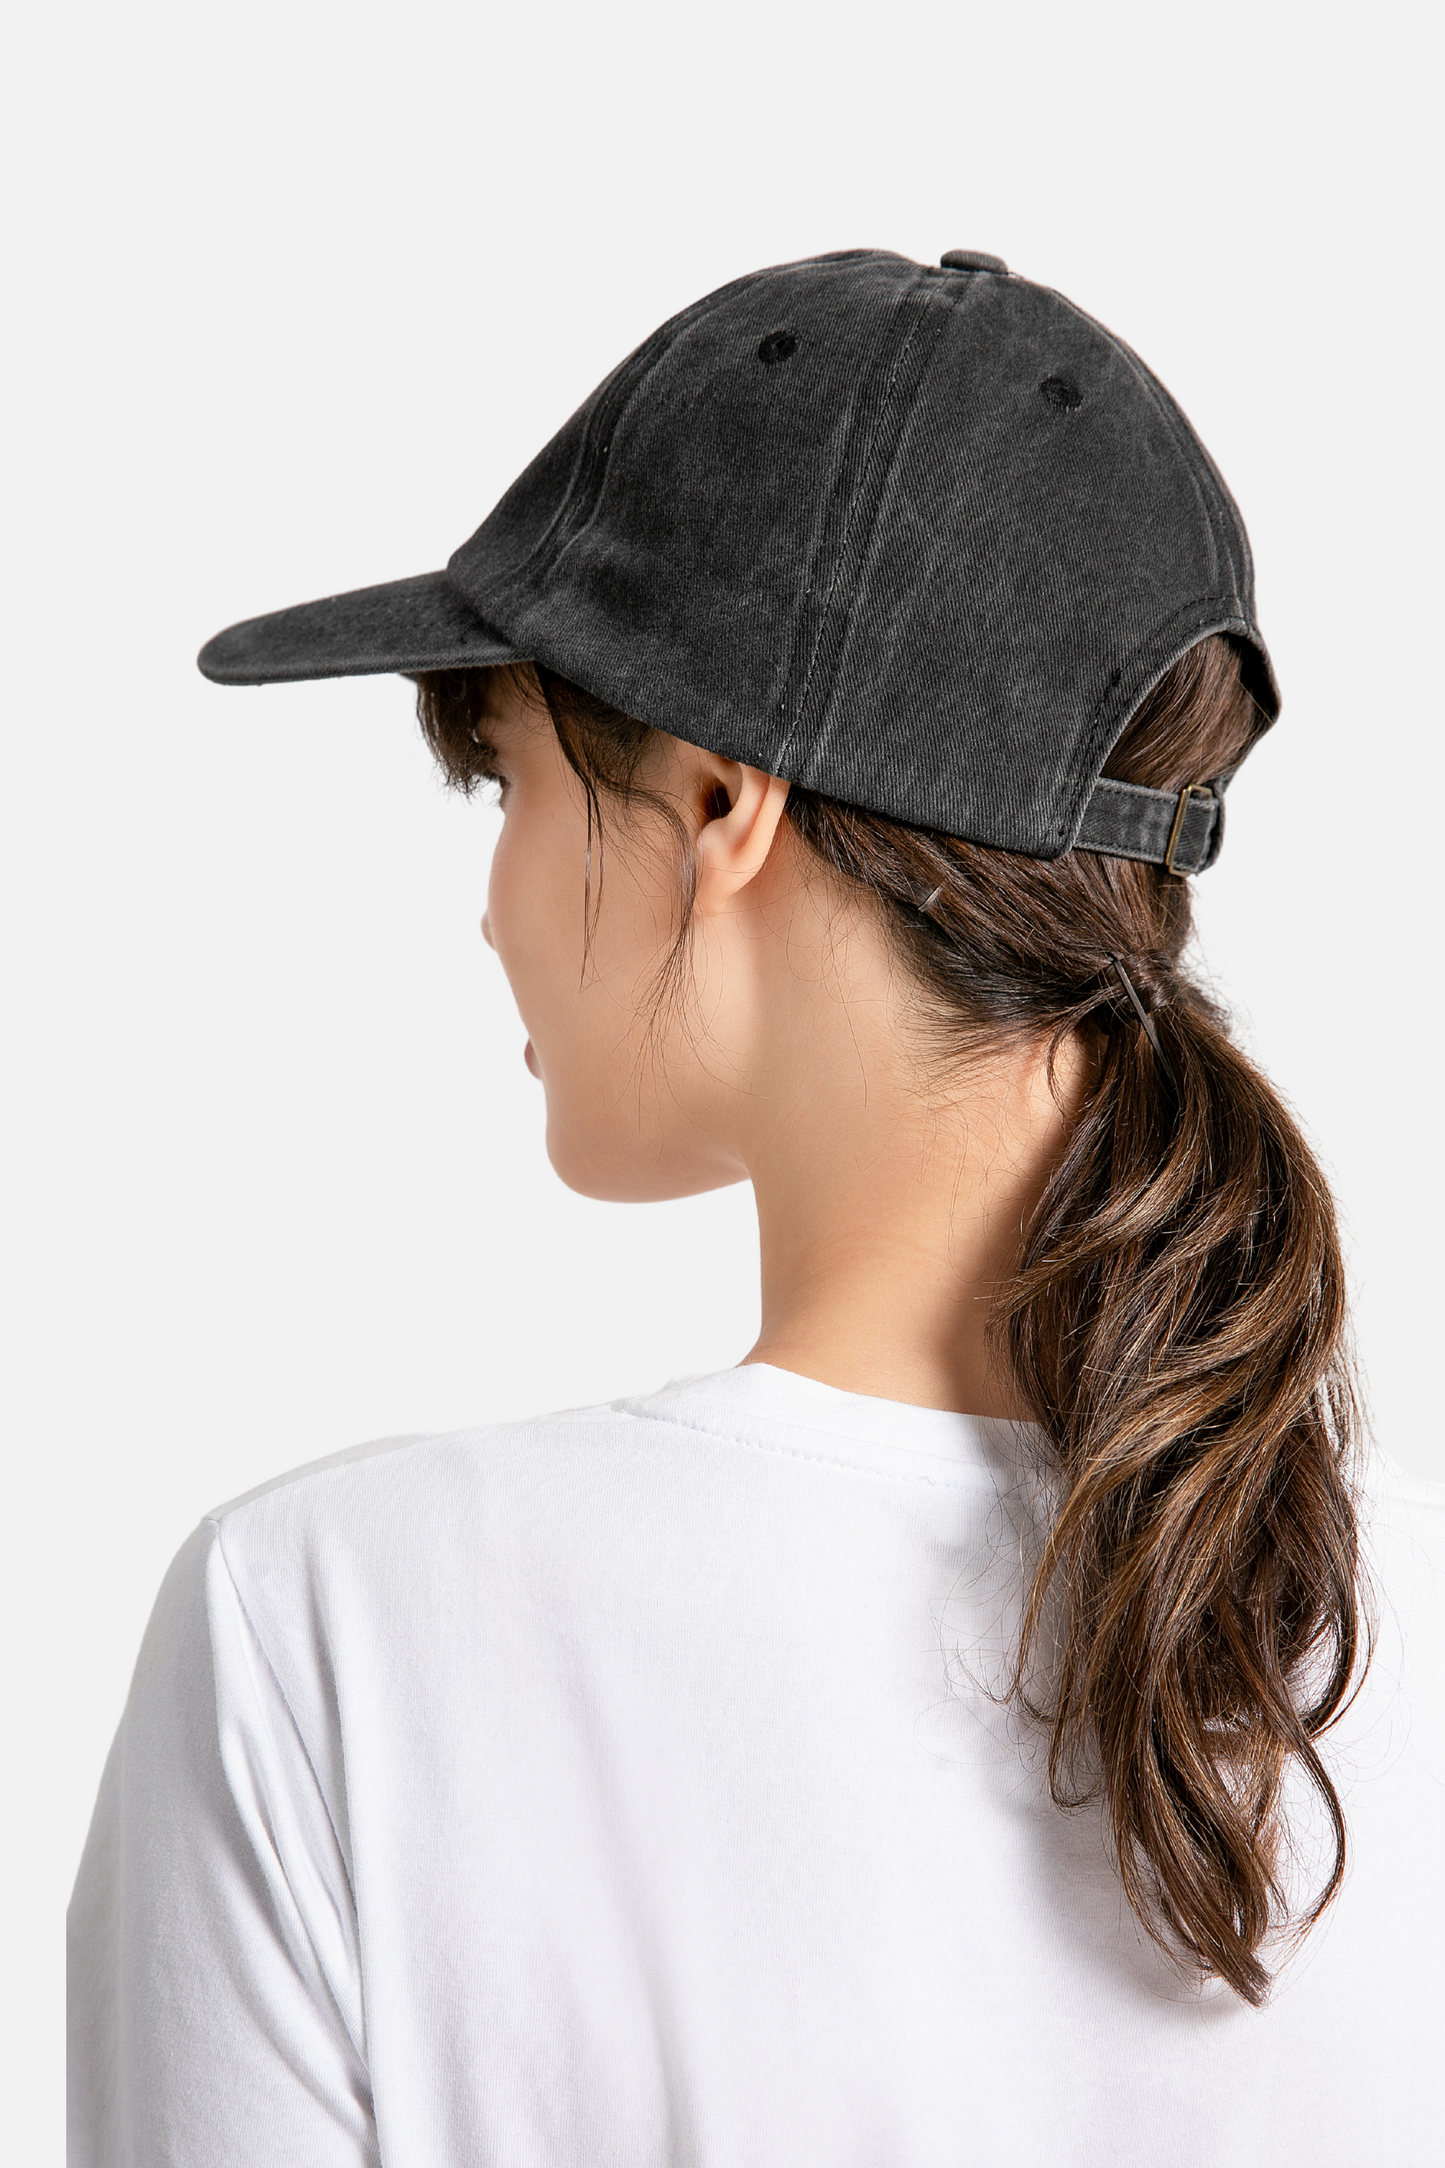 Ryker Washed Cap, 6 Panels